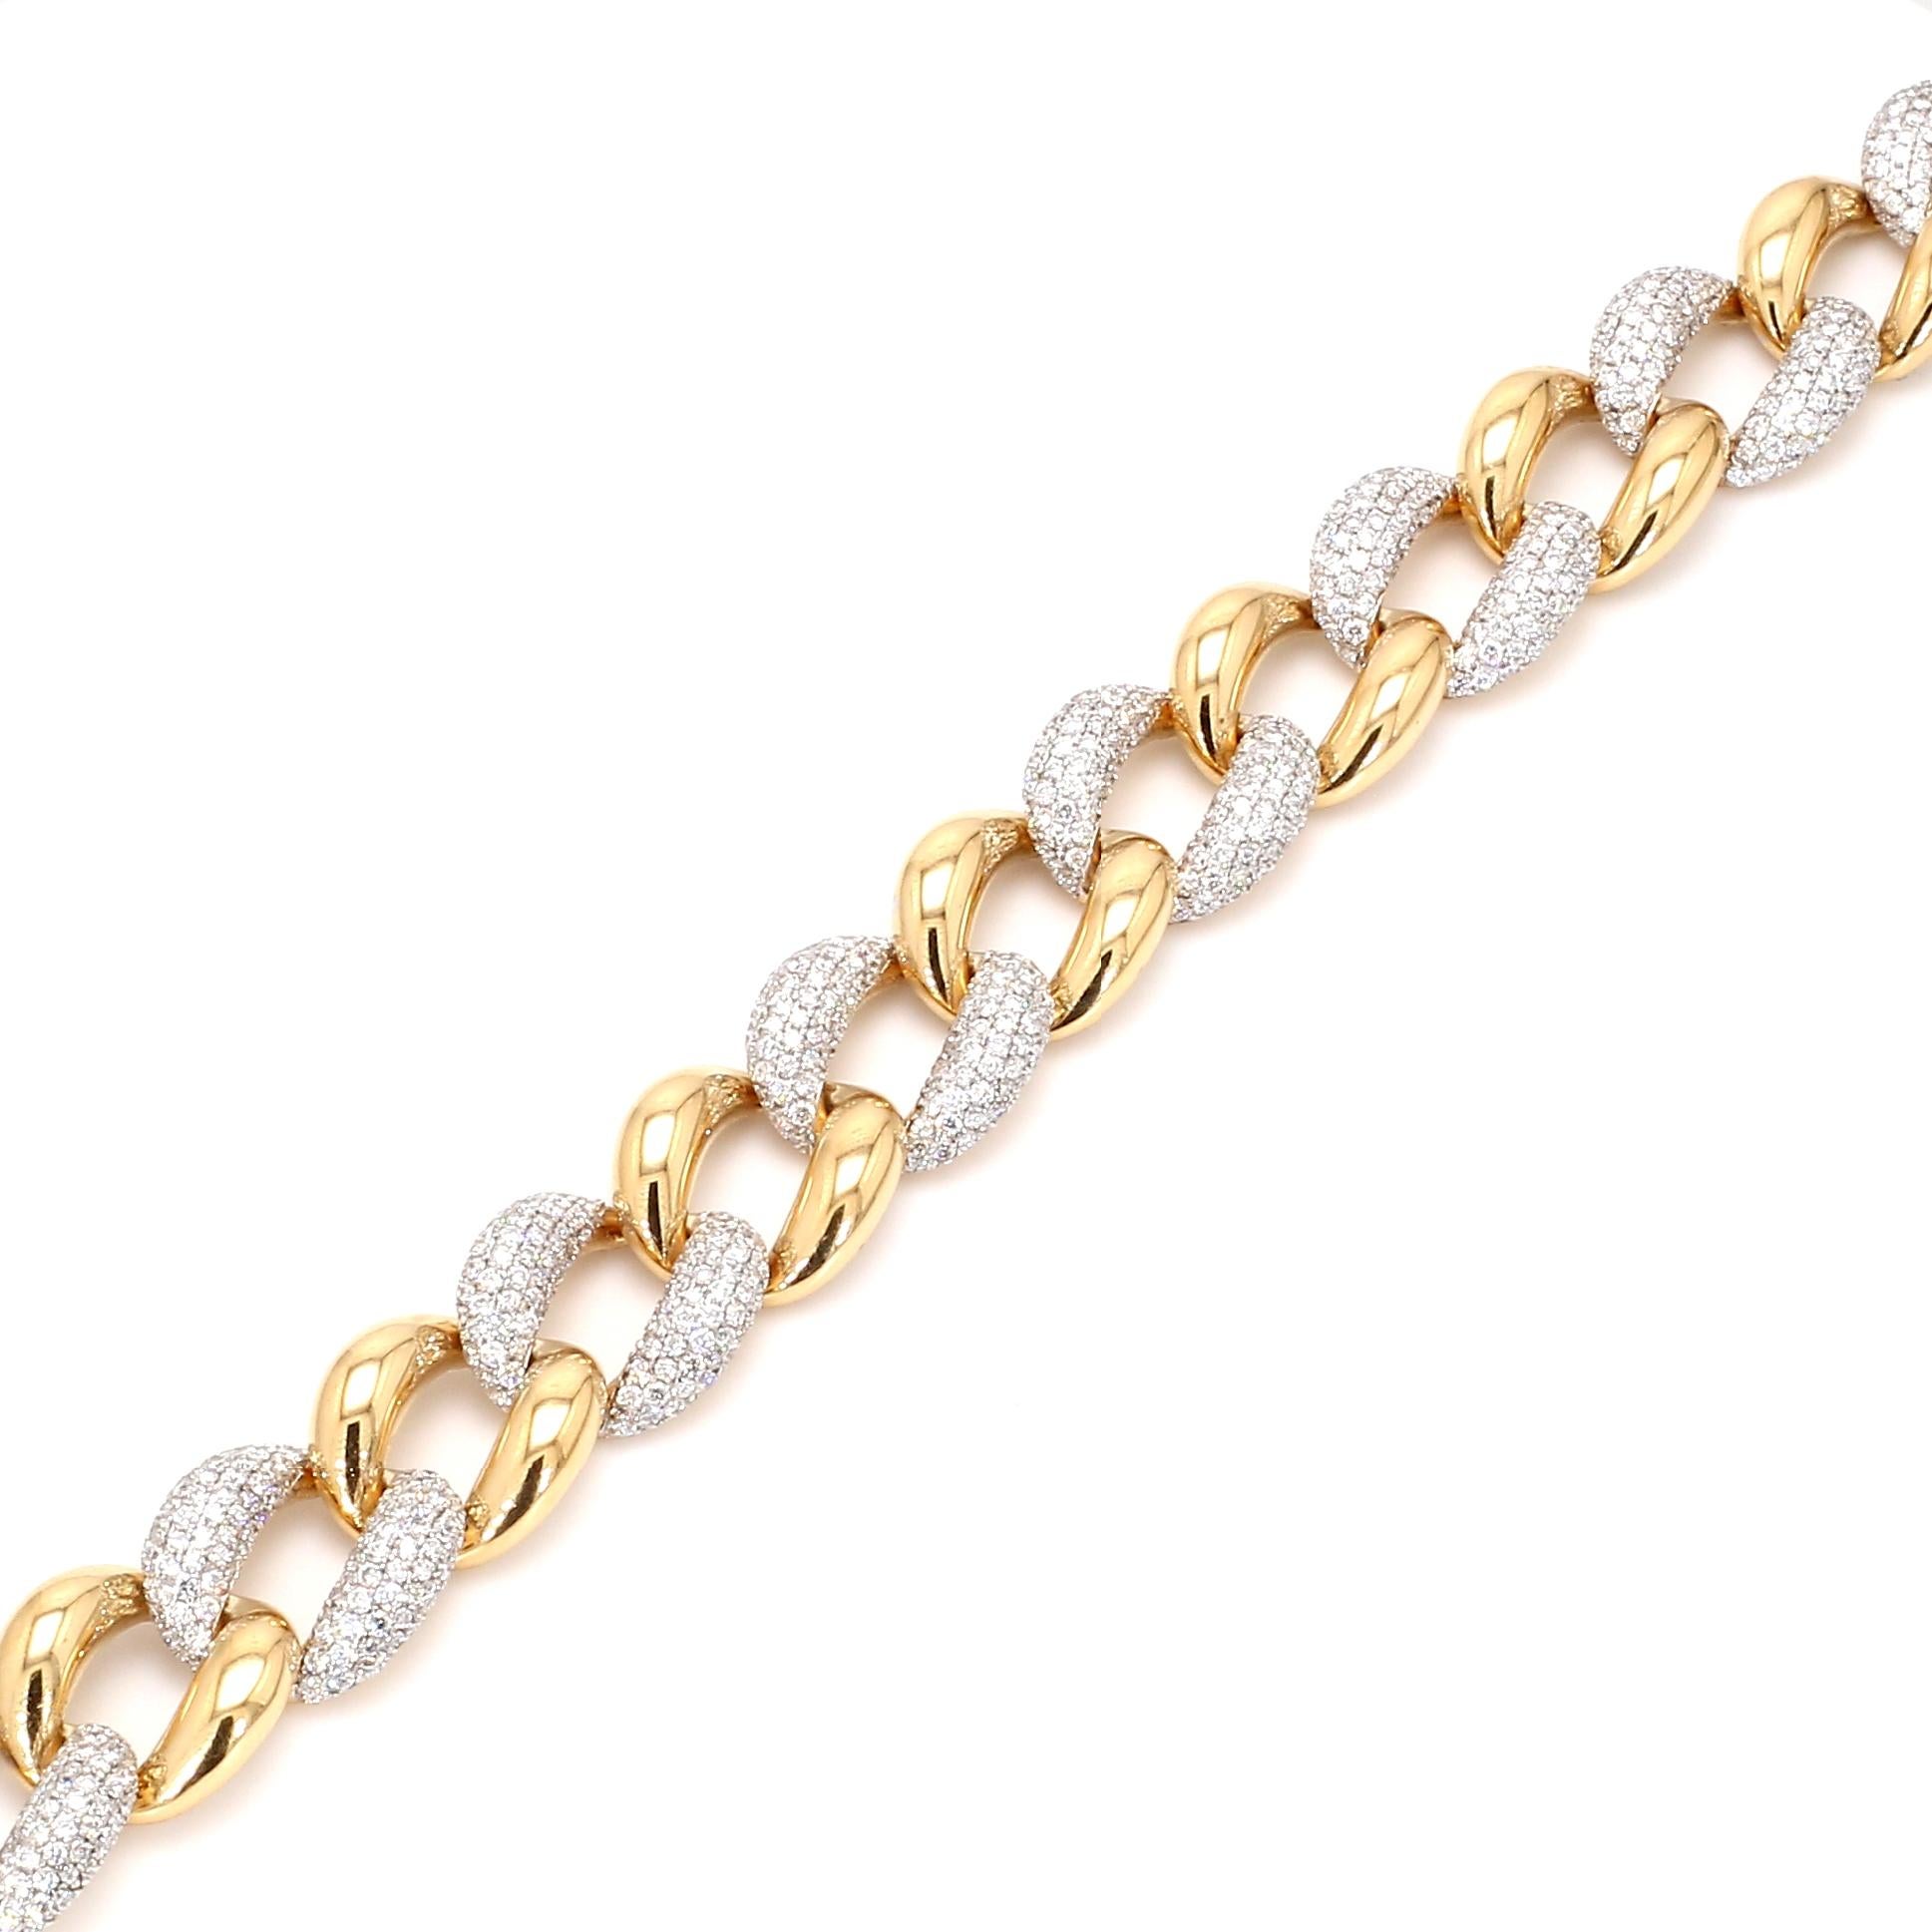 Item Code :- CN-24621
Gross Wt. :- 27.55 gm
18k Yellow Gold Wt. :- 26.43 gm
Diamond Wt. :- 5.60 Ct. ( AVERAGE DIAMOND CLARITY SI1-SI2 & COLOR H-I )
Bracelet Length :- 7 Inches

✦ Sizing
.....................
We can adjust most items to fit your